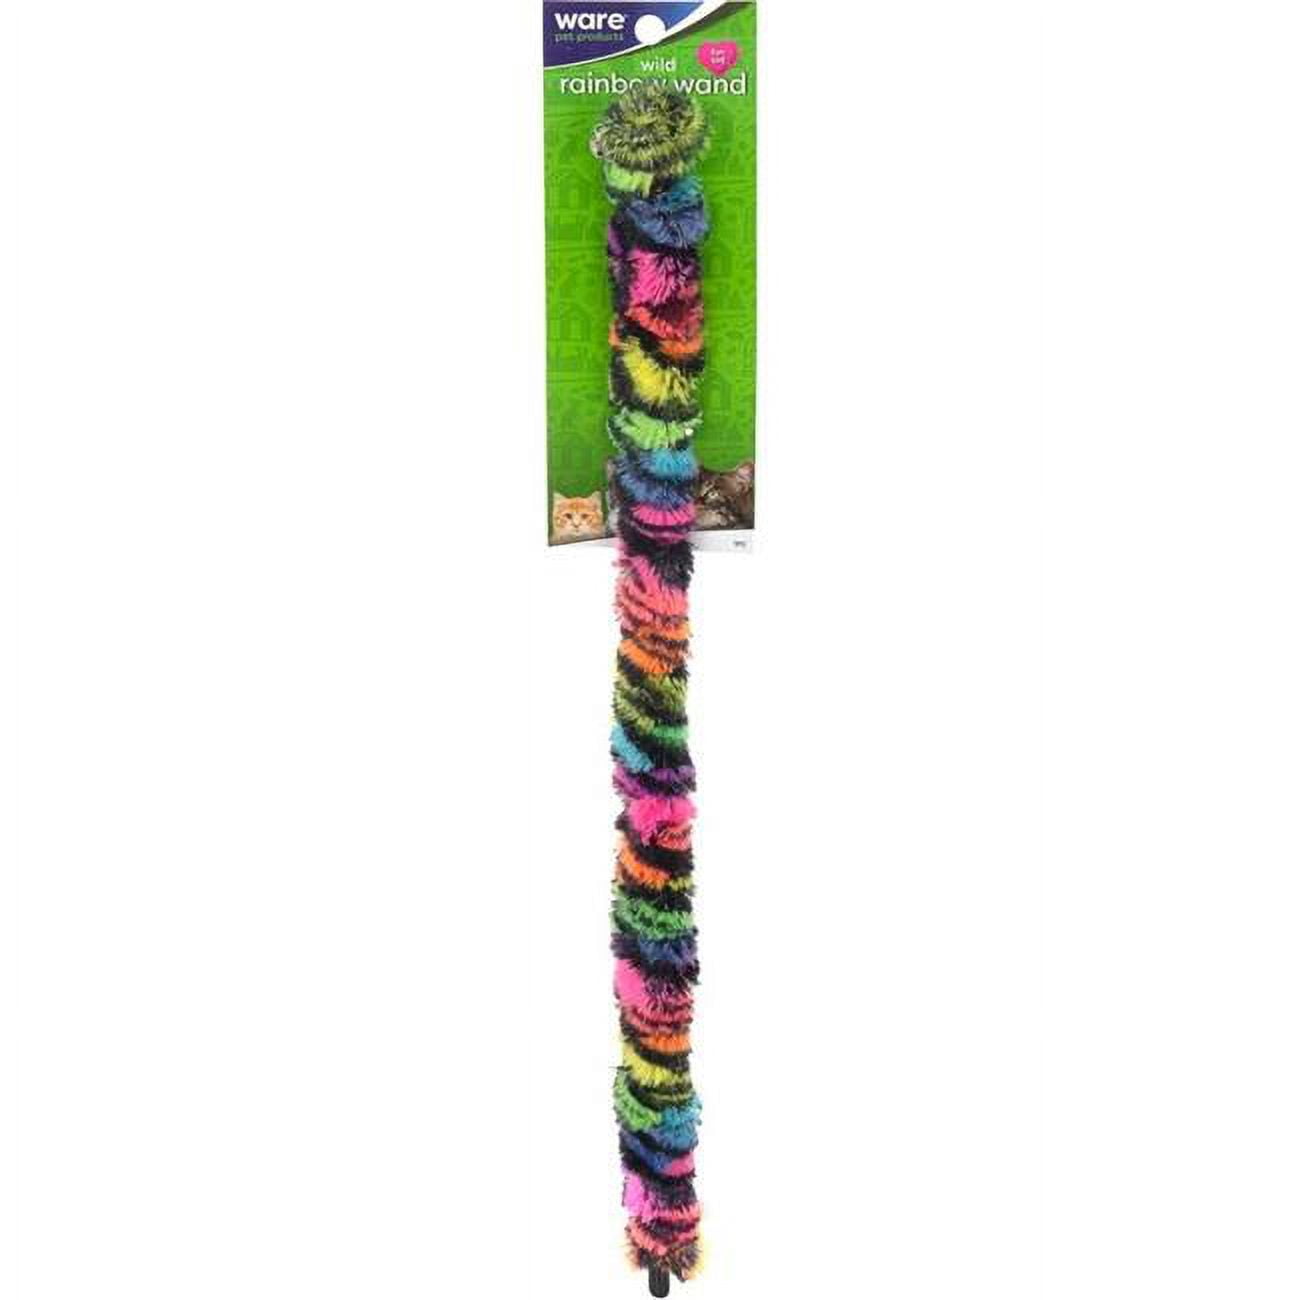 Picture of Ware Manufacturing 10257 Wild Rainbow Wand Cat Toy